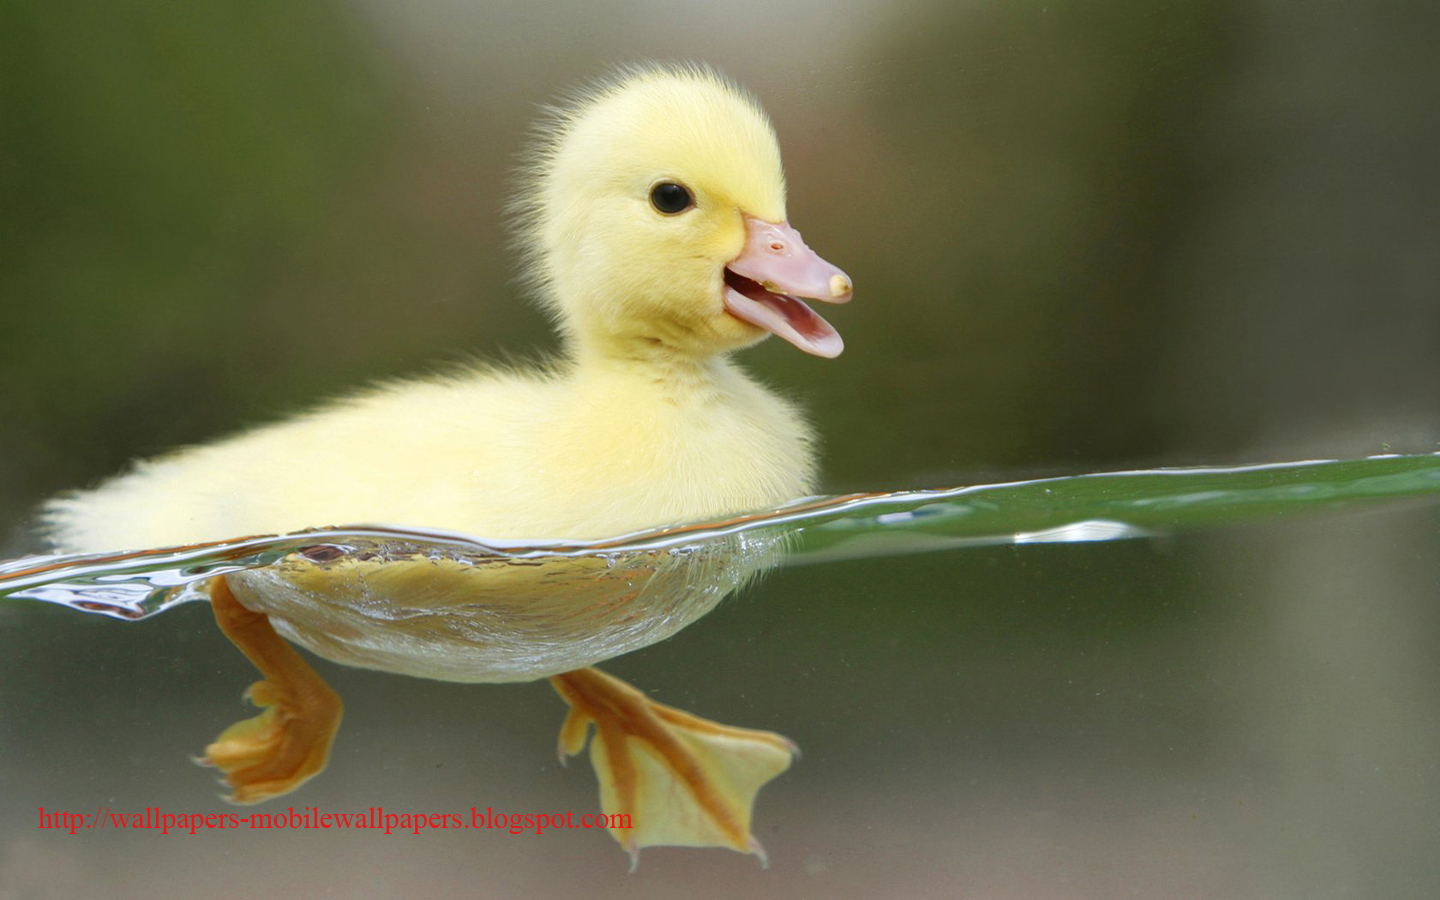 Cute Baby Ducks Images amp Pictures   Becuo